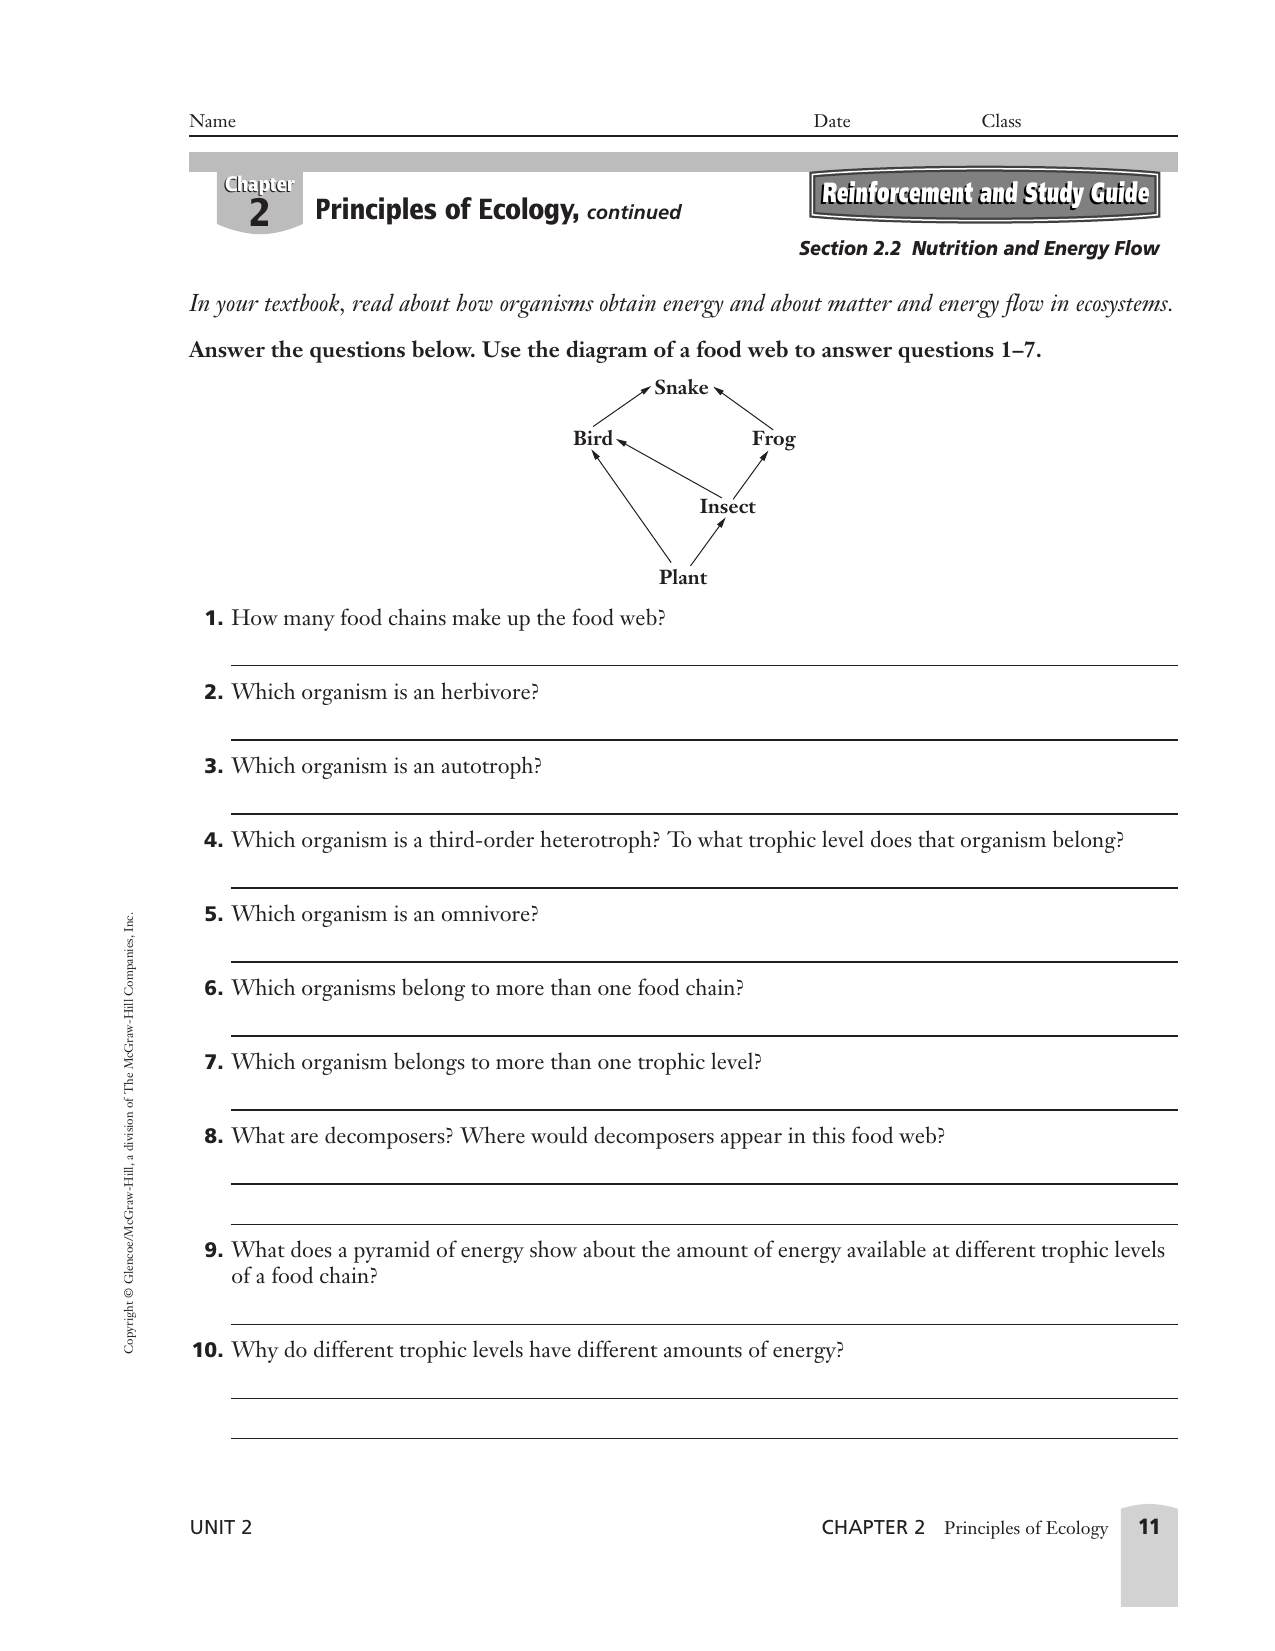 Principles of Ecology, continued Reinforcement and Study Guide With Regard To Principles Of Ecology Worksheet Answers